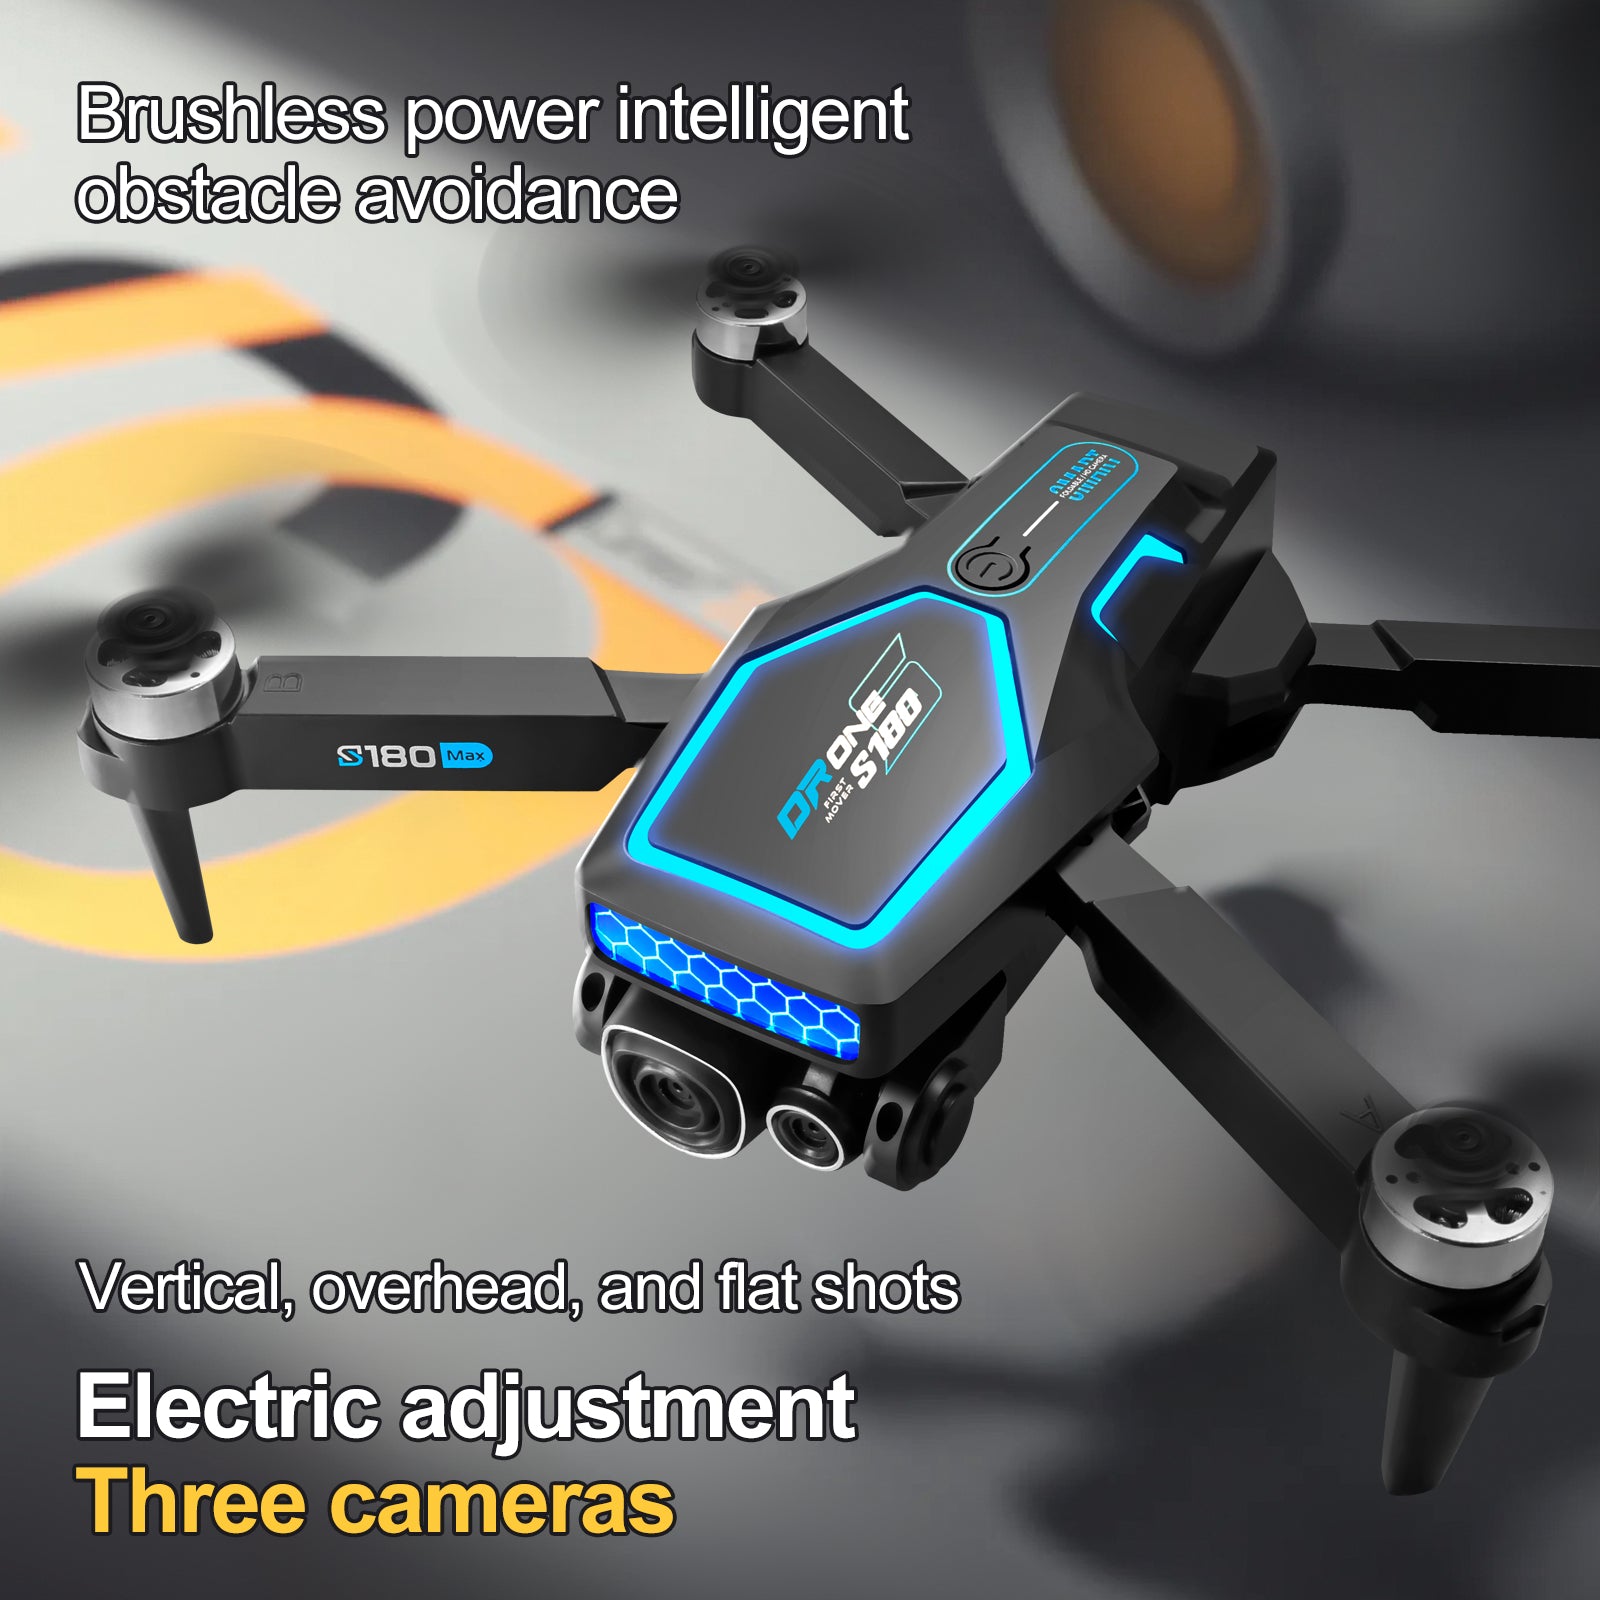 S180 Drone, High-tech drone with advanced features like brushless power and obstacle avoidance for precision aerial photography.